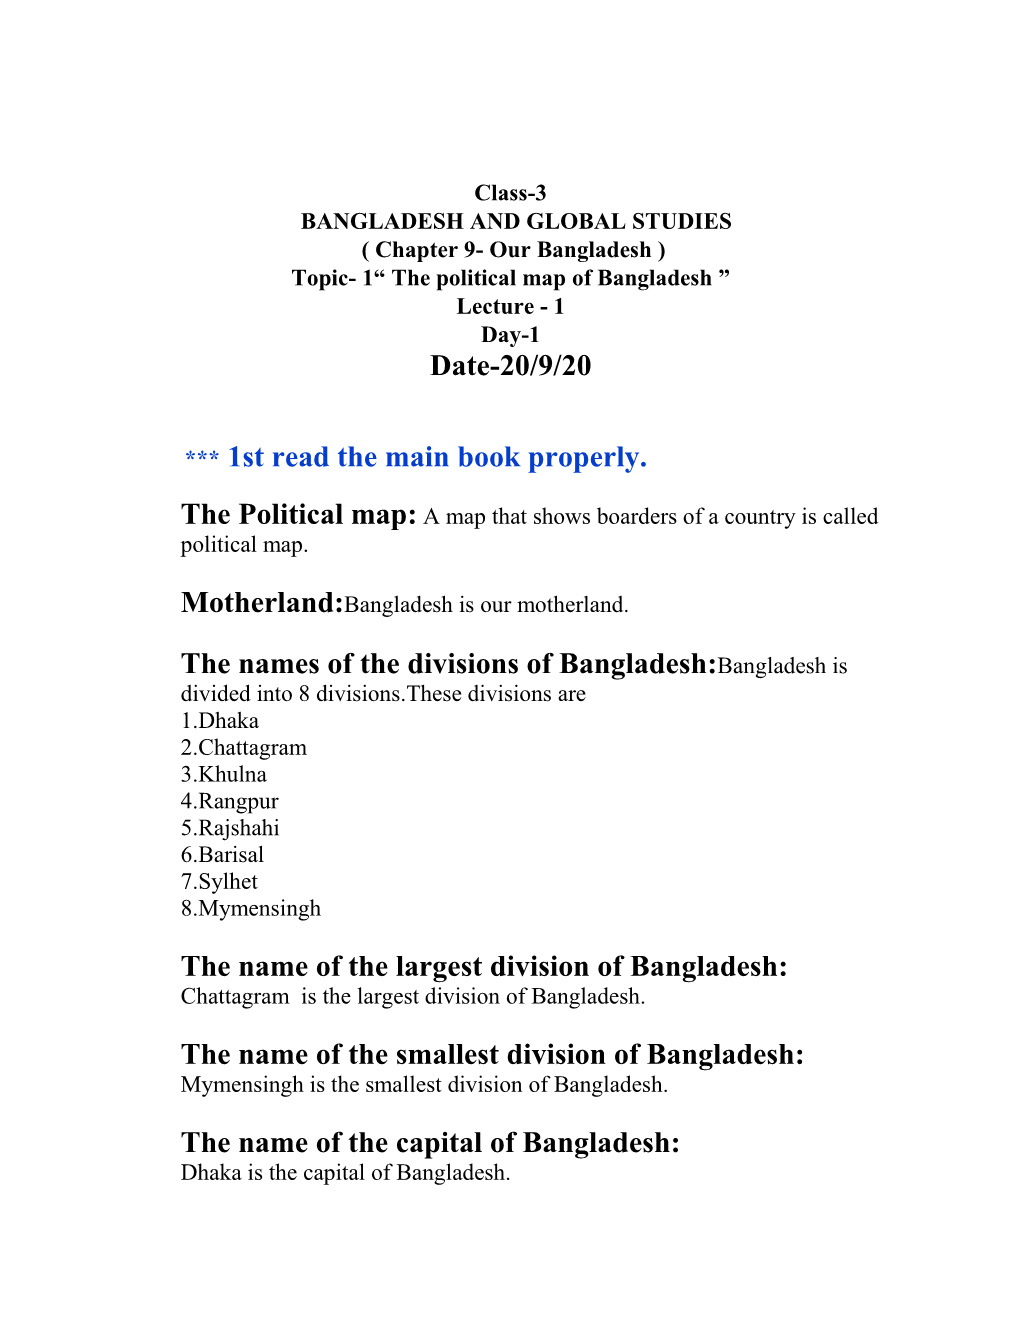 The Political Map of Bangladesh ” Lecture - 1 Day-1 Date-20/9/20